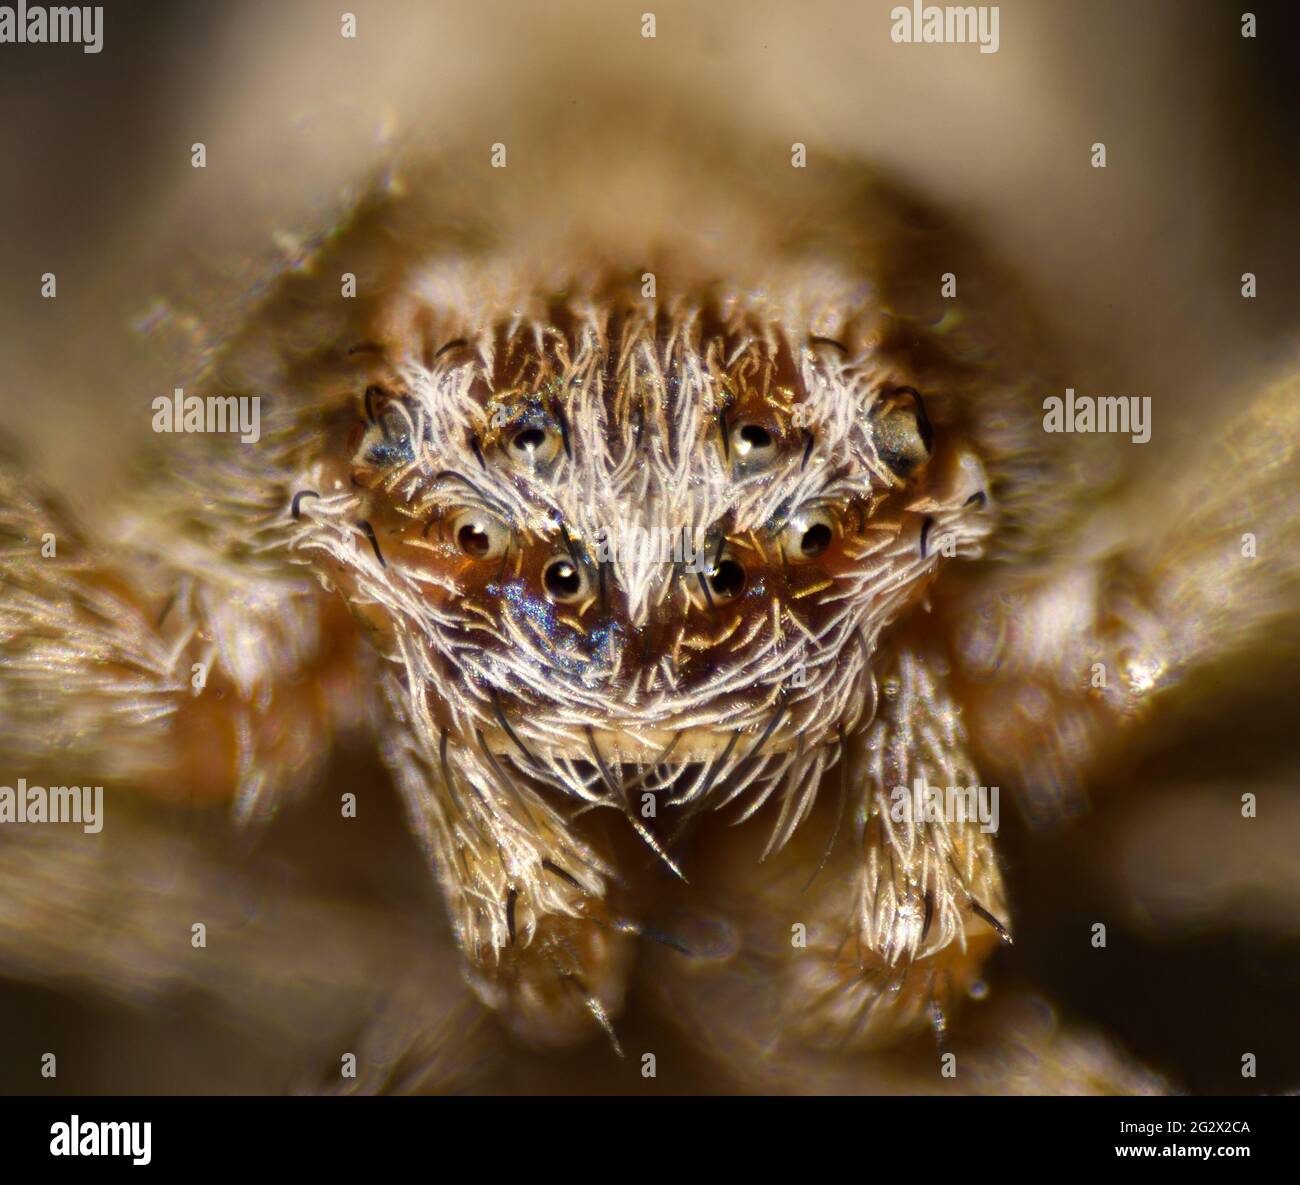 Spider eyes, high macro image of a spiders simple eyes Stock Photo